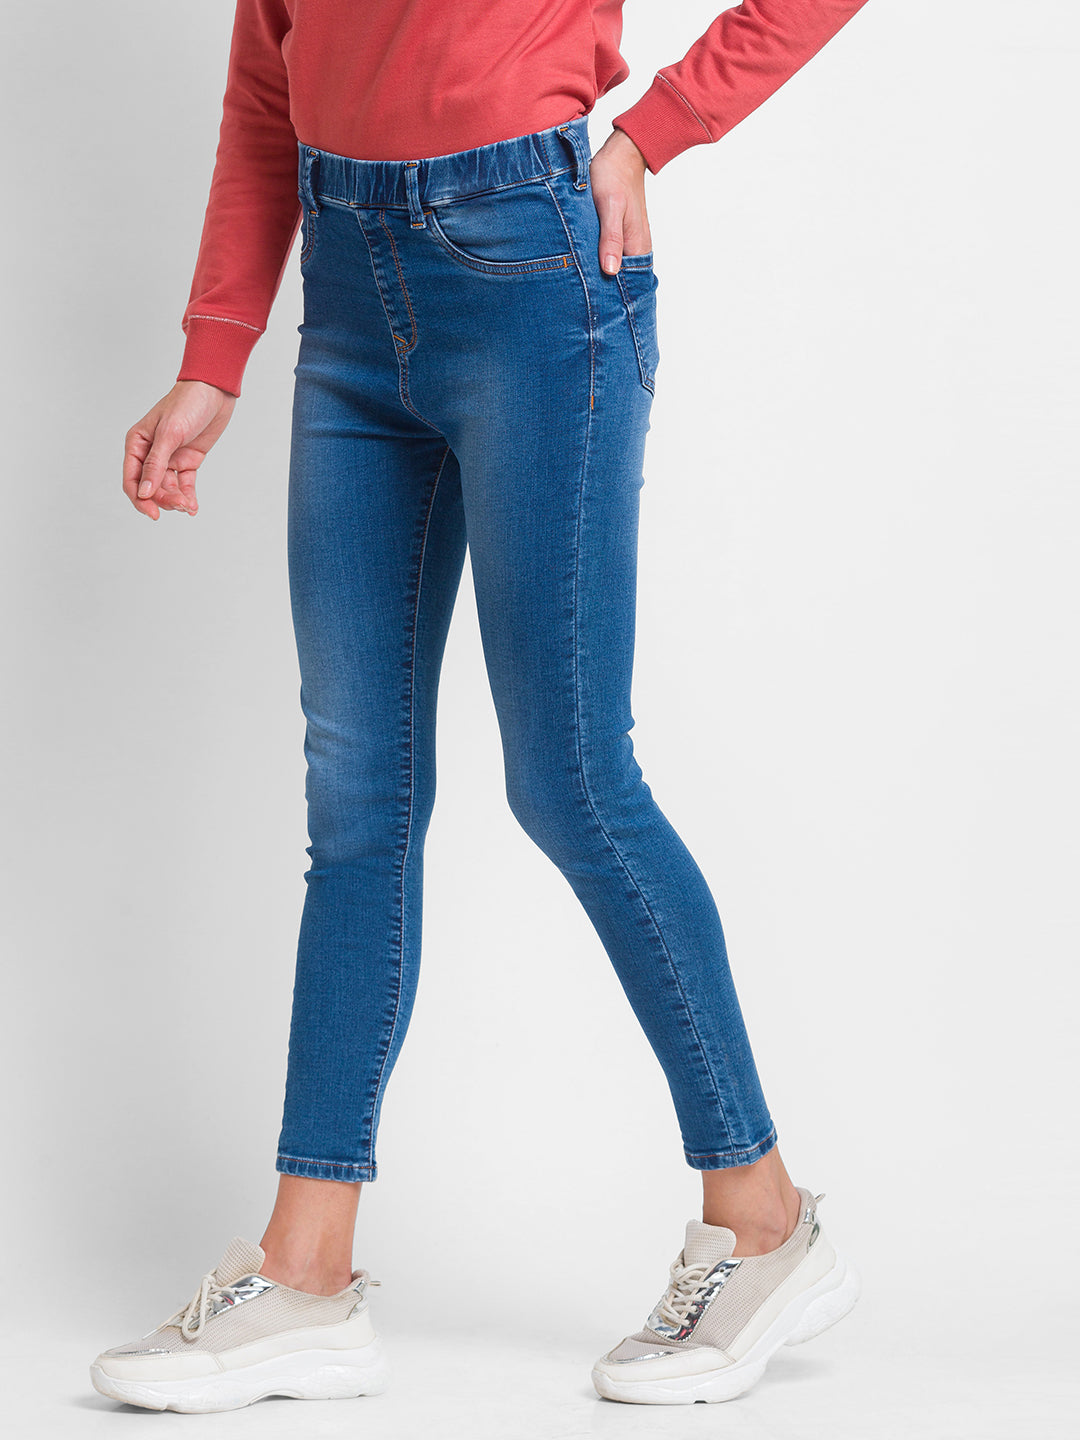 Update more than 212 spykar jeans for womens best